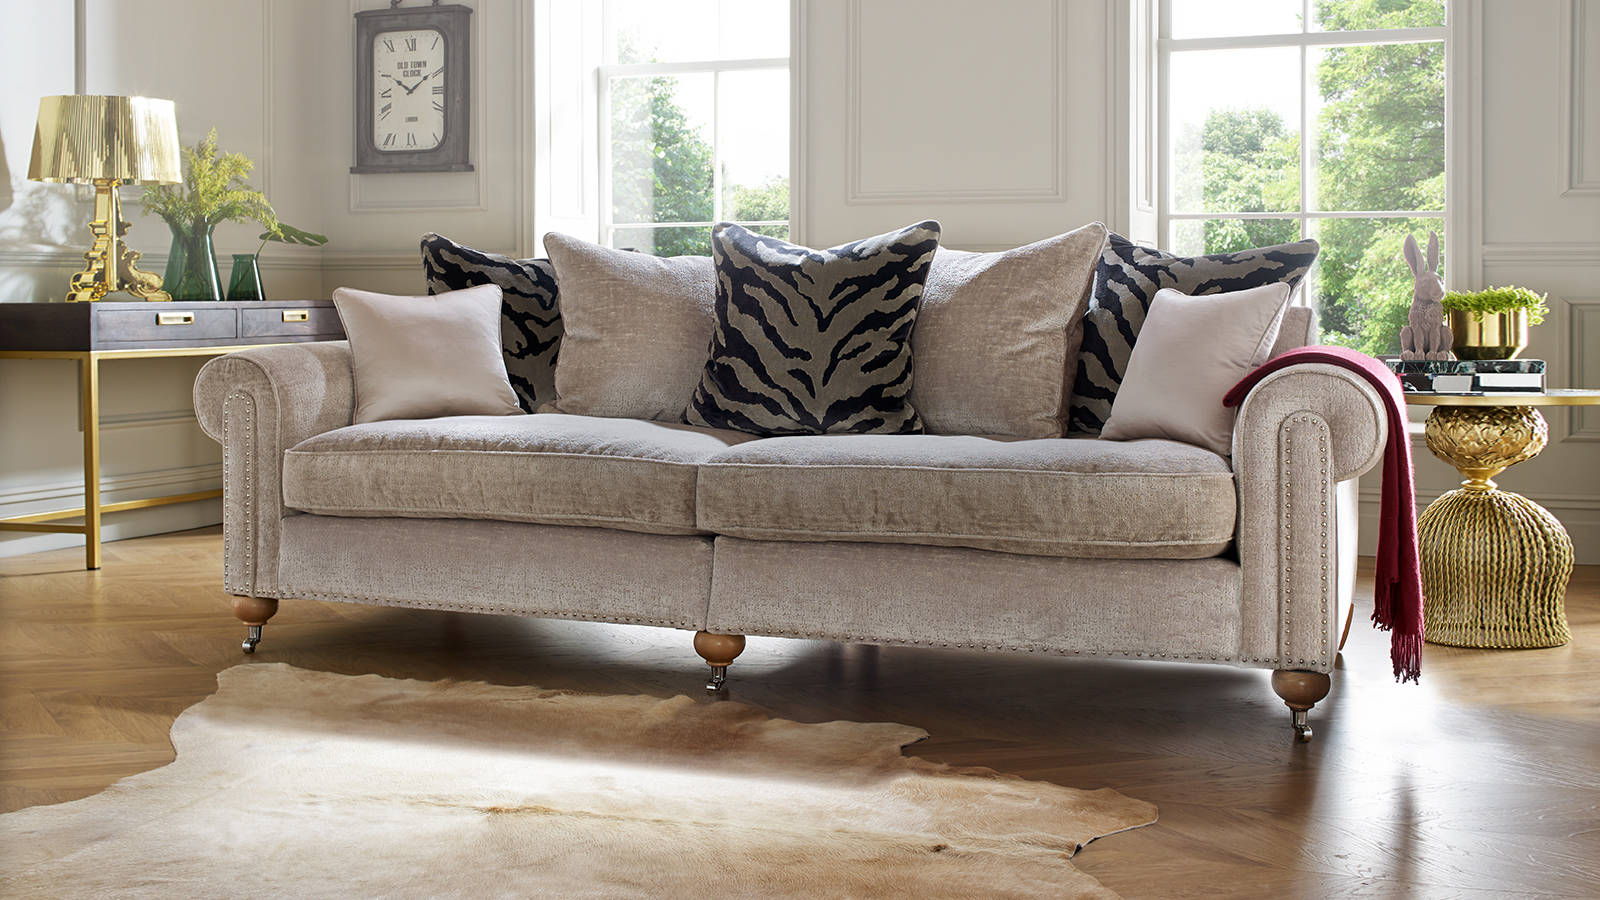 Sofology - Sofas, Corner Sofas, Sofa Beds & Chairs Always Low Prices